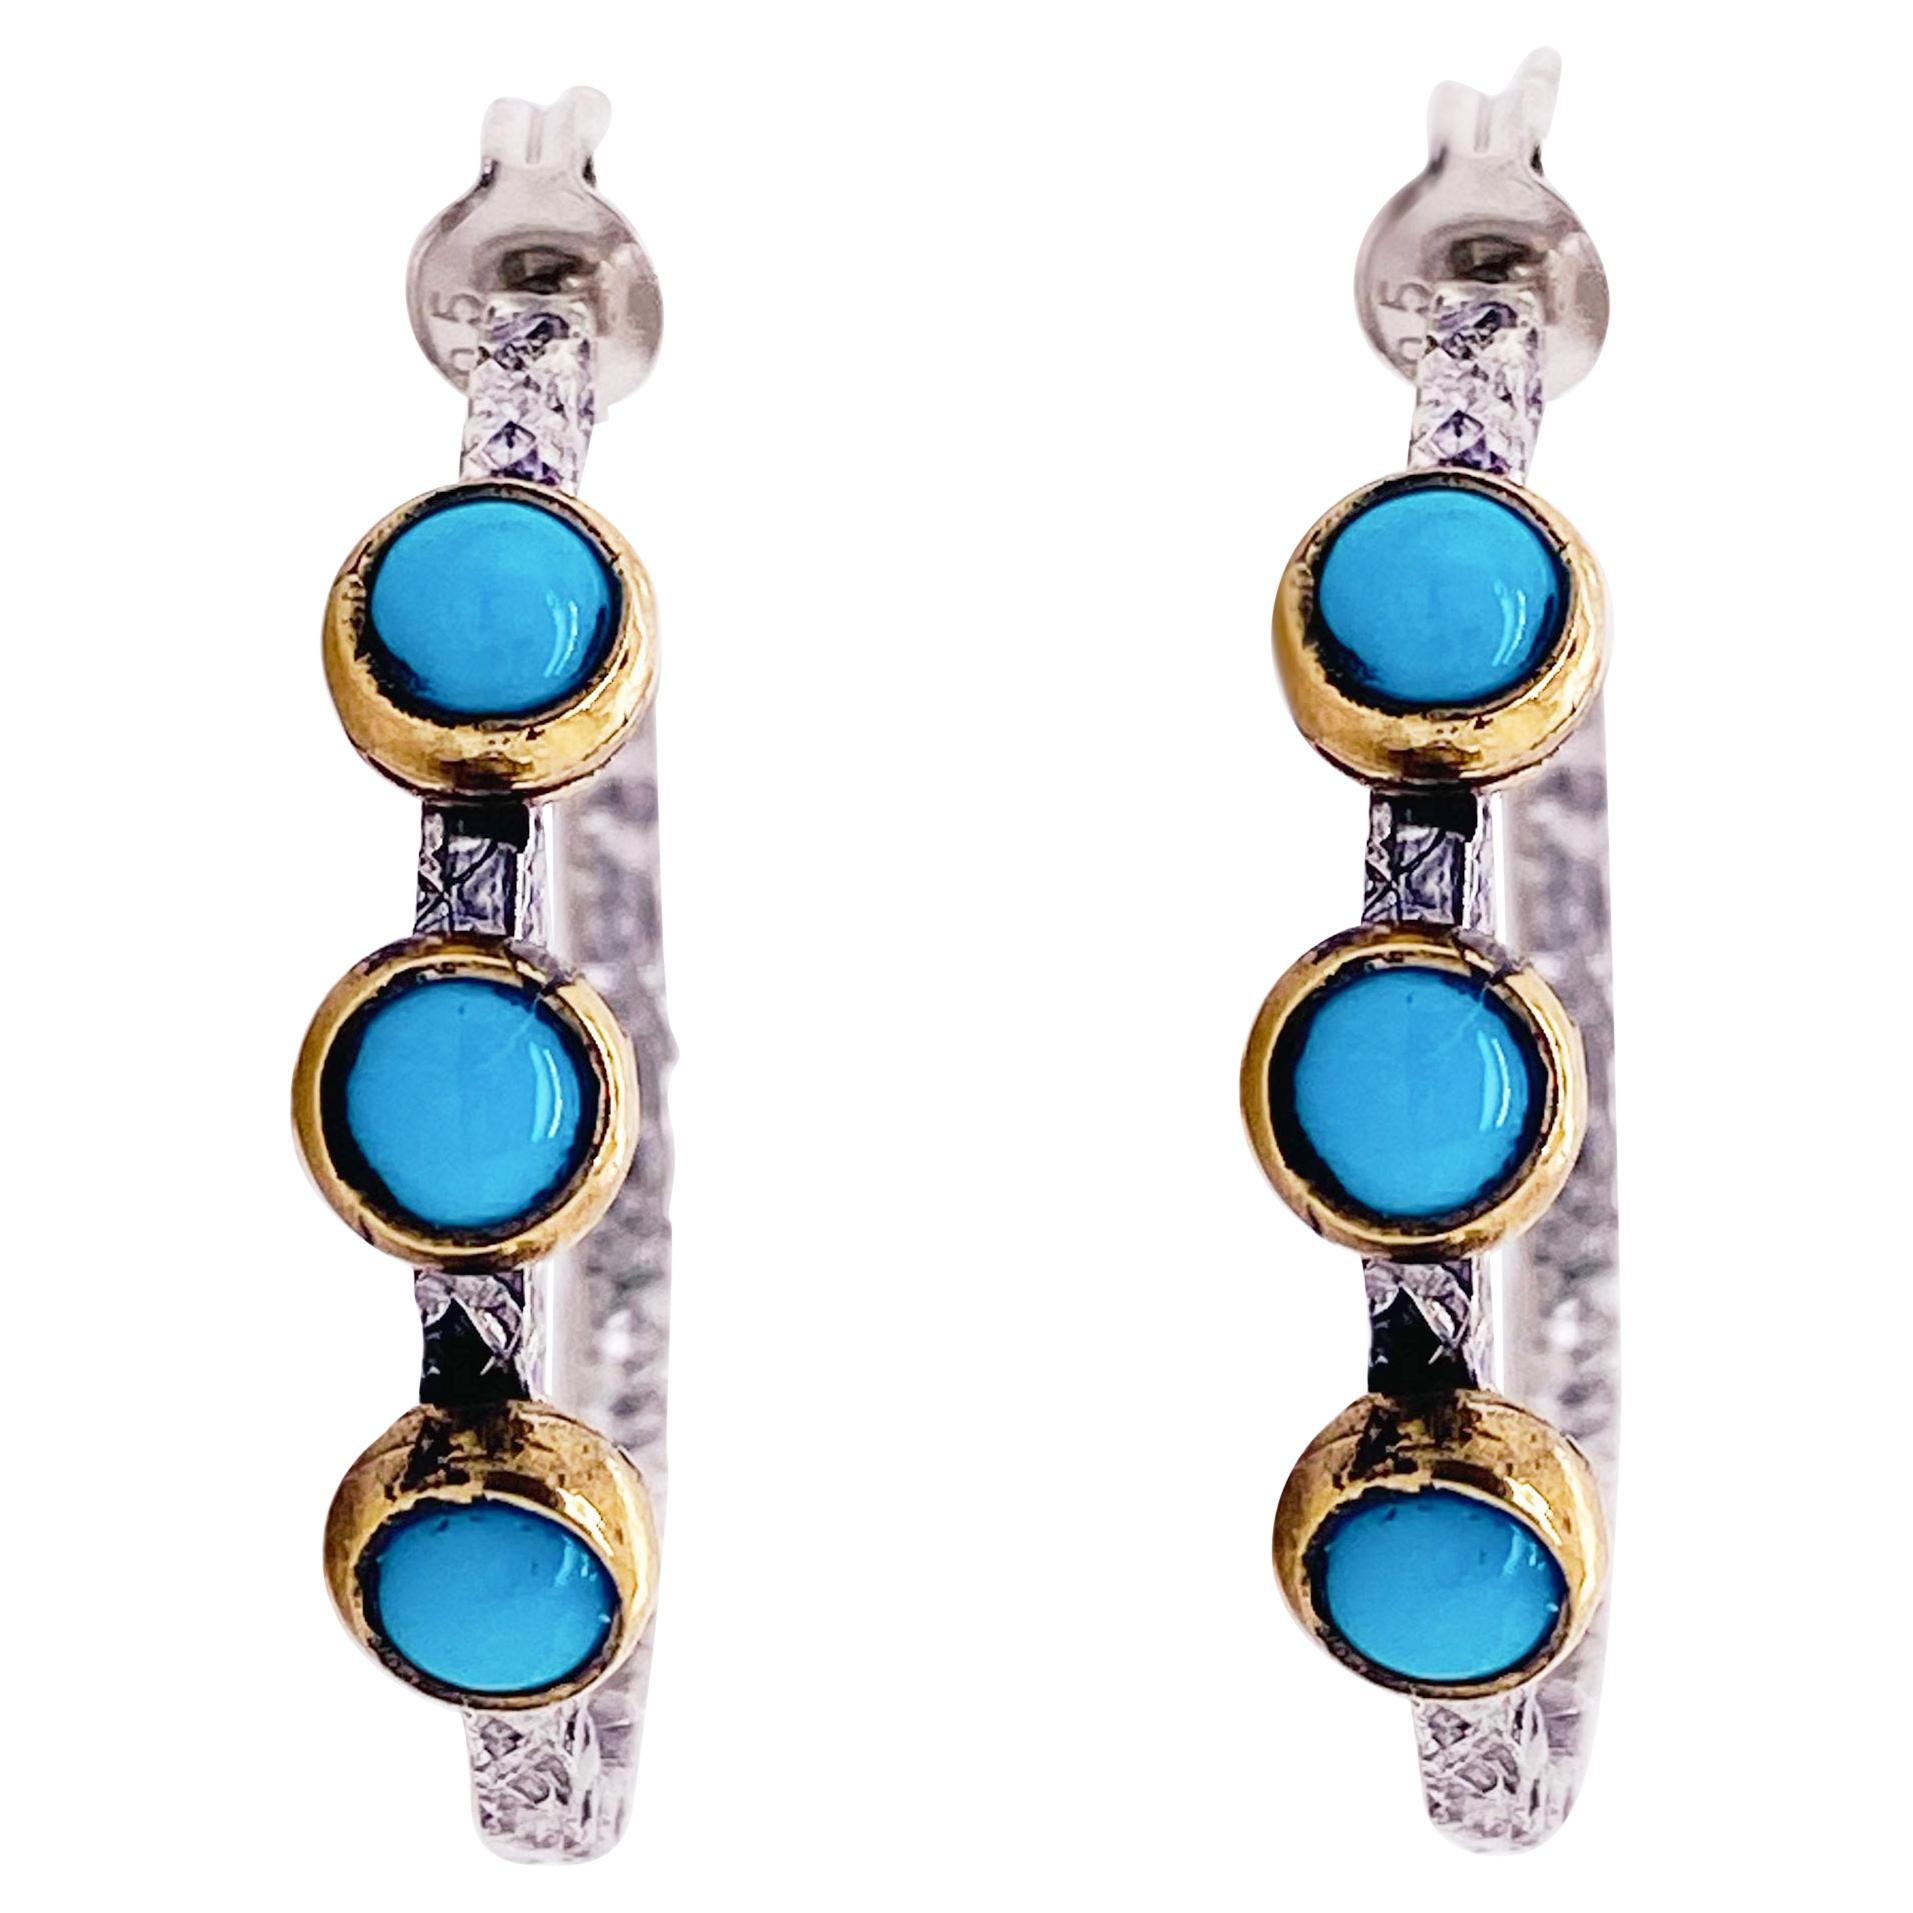 Mixed Metal Hoops with Turquoise Stones and Gold Bezels